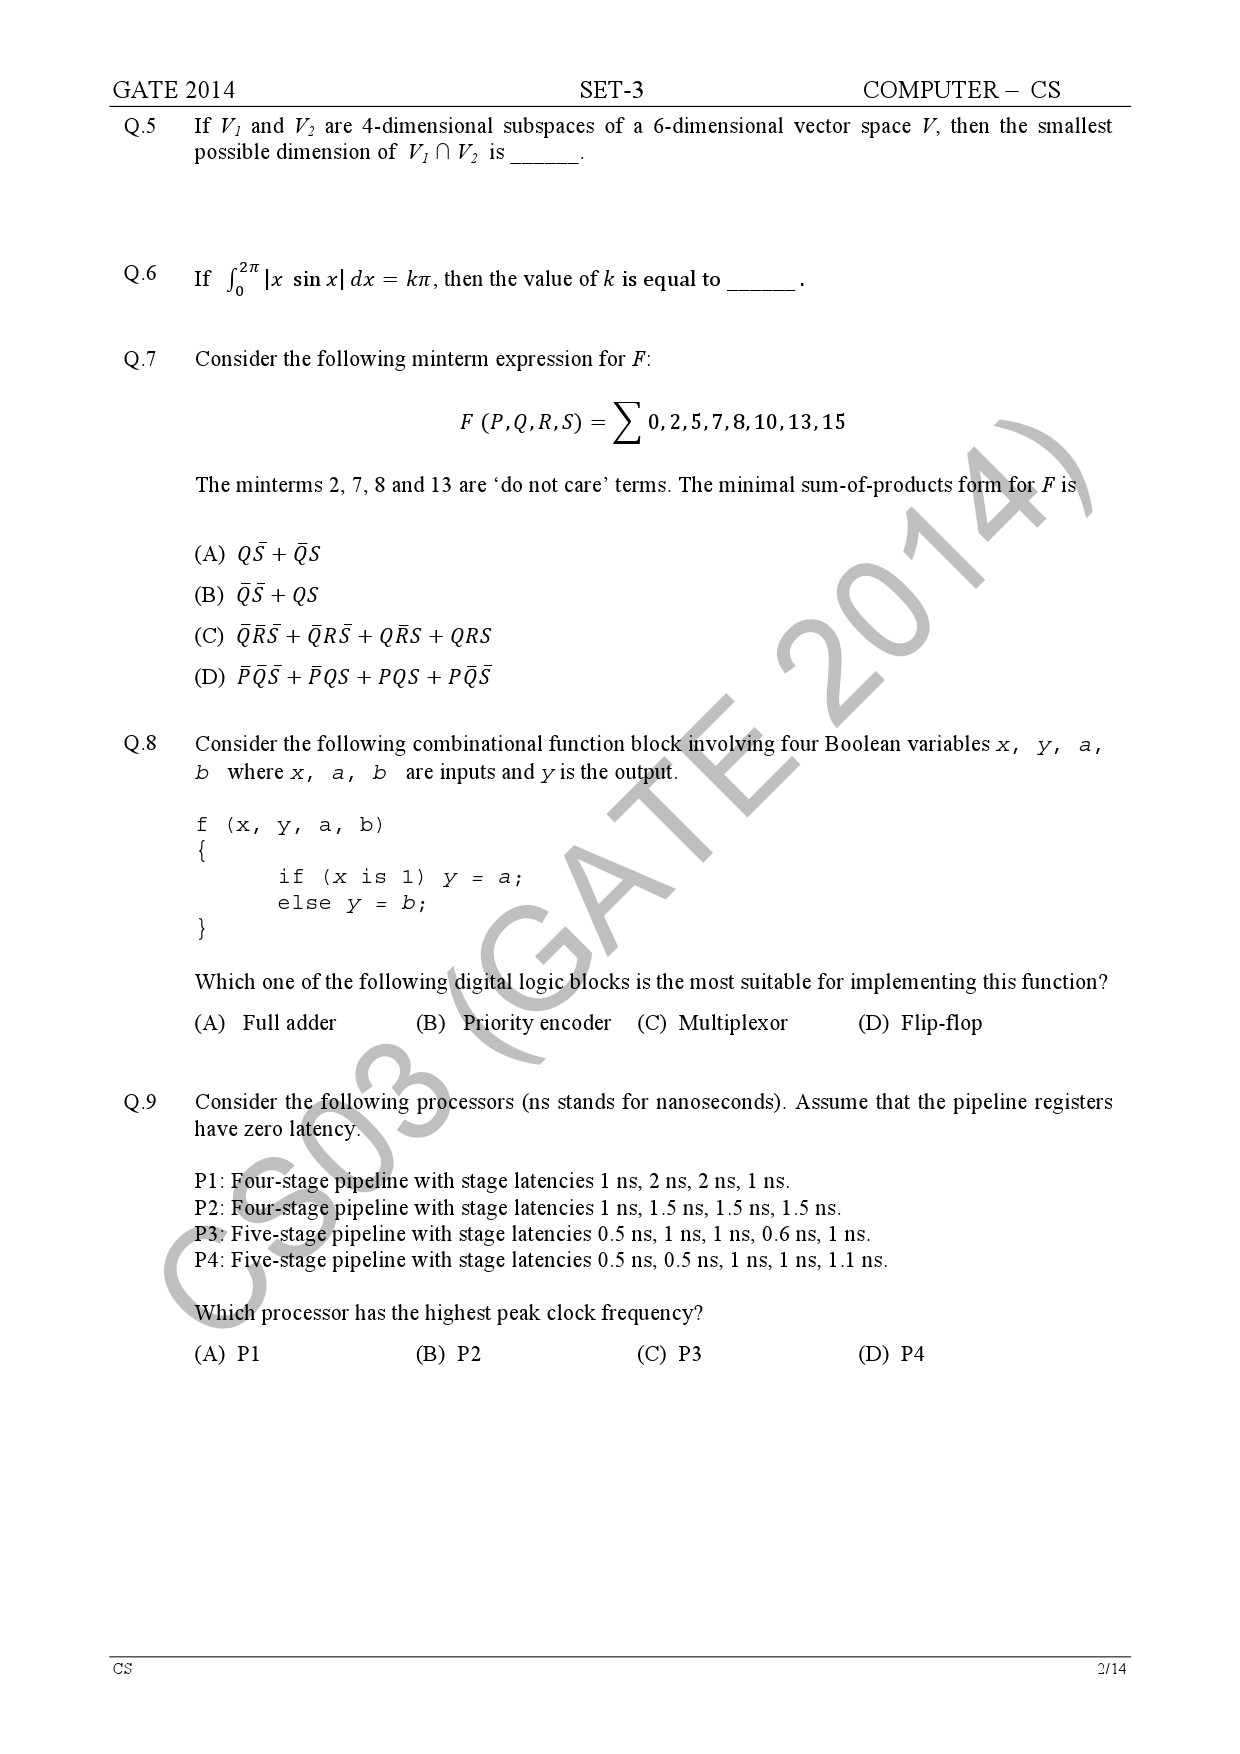 GATE Exam Question Paper 2014 Computer Science and Information Technology Set 3 8